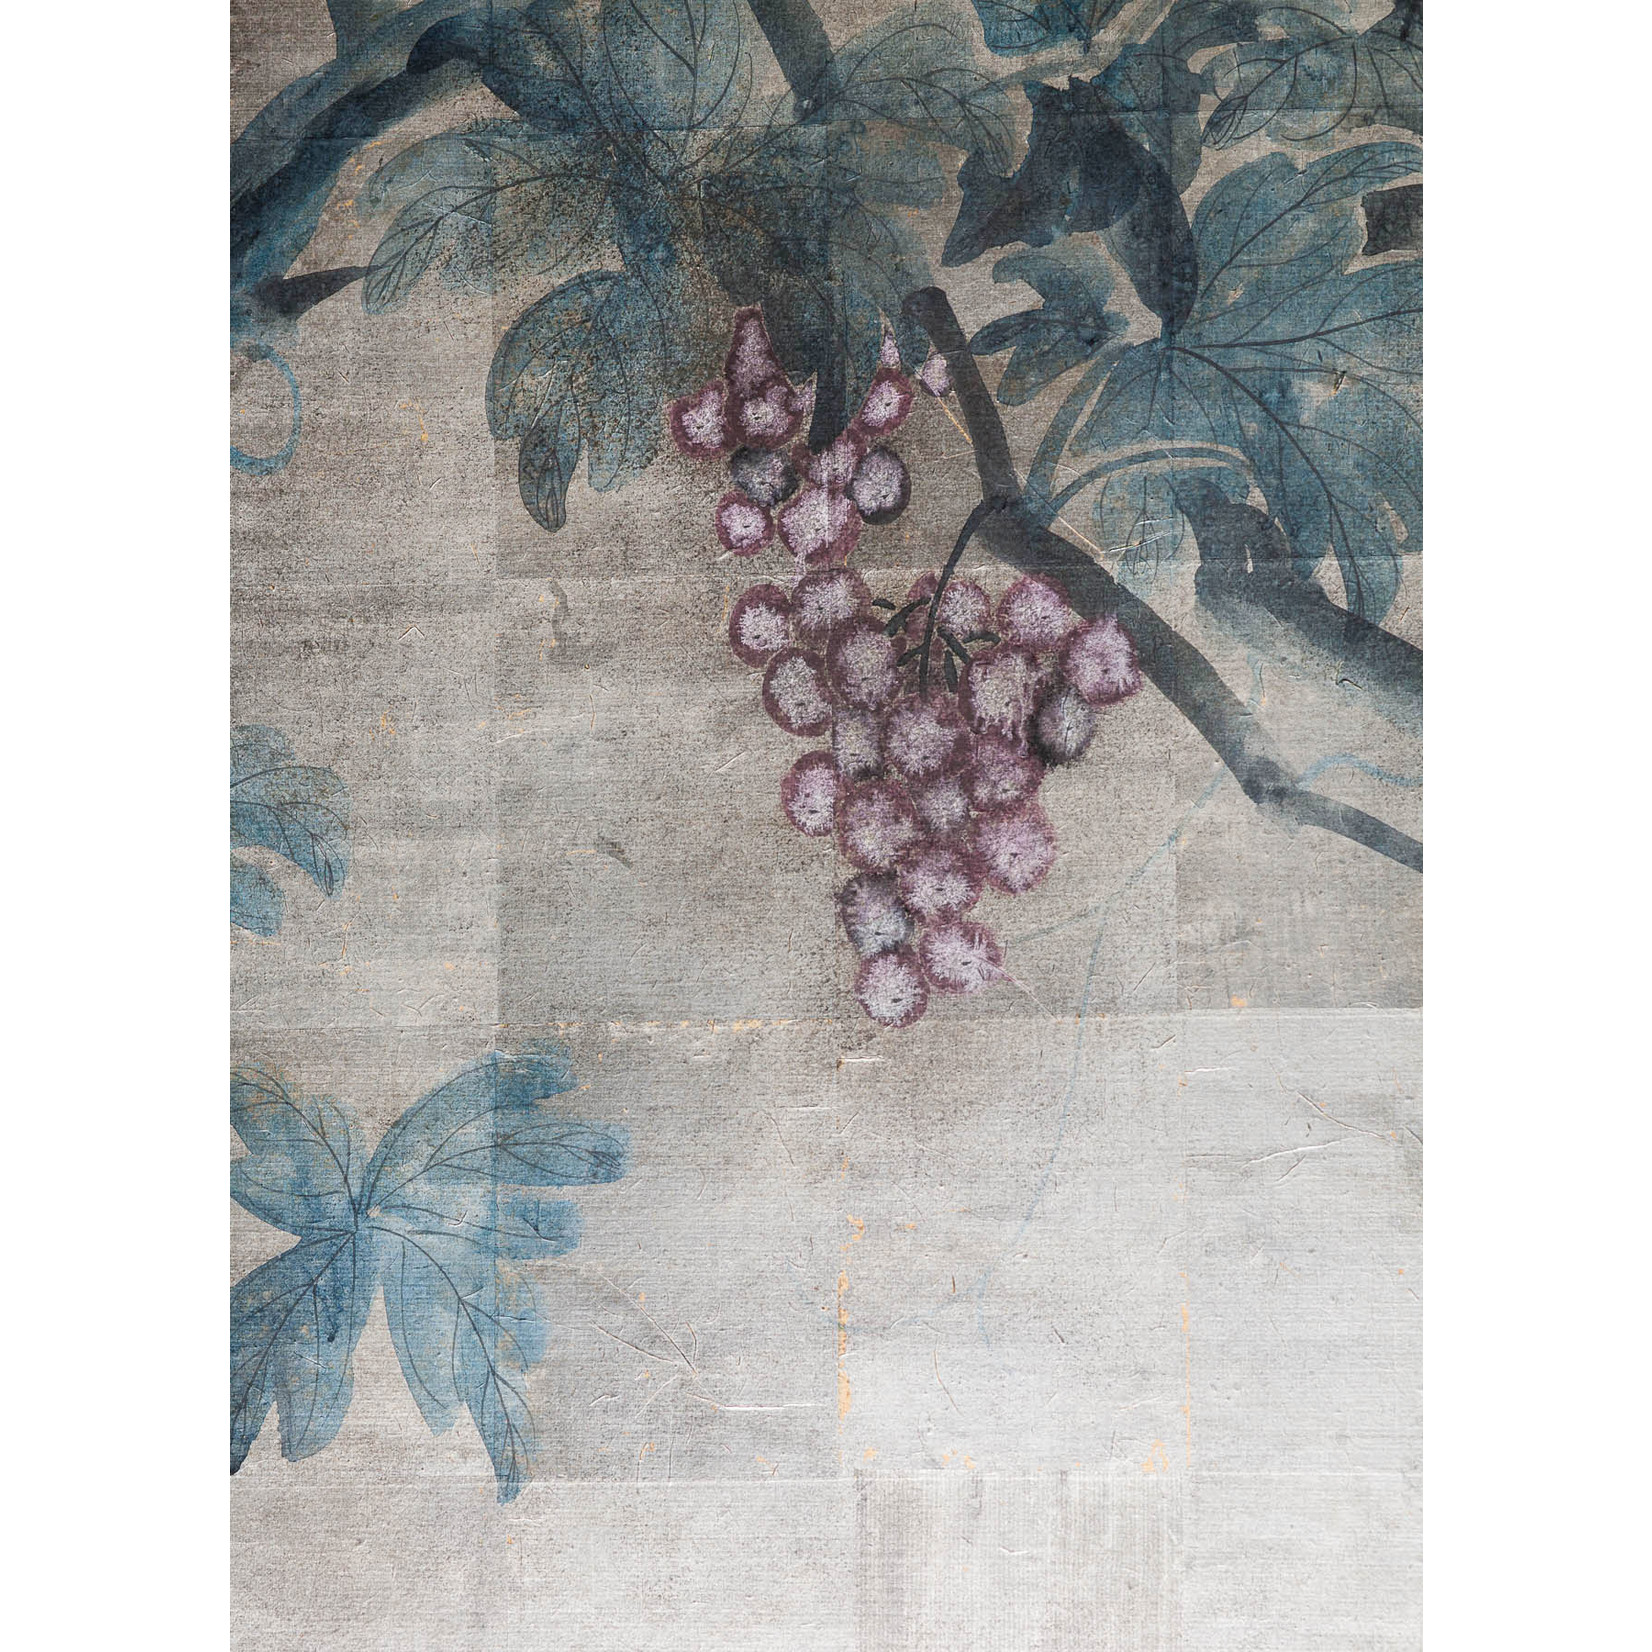 Lawrence & Scott Sung Tze-Chin "Tranquility" 4-Panel Ink on Paper Grapevine Chinoiserie Hanging Screen Painting